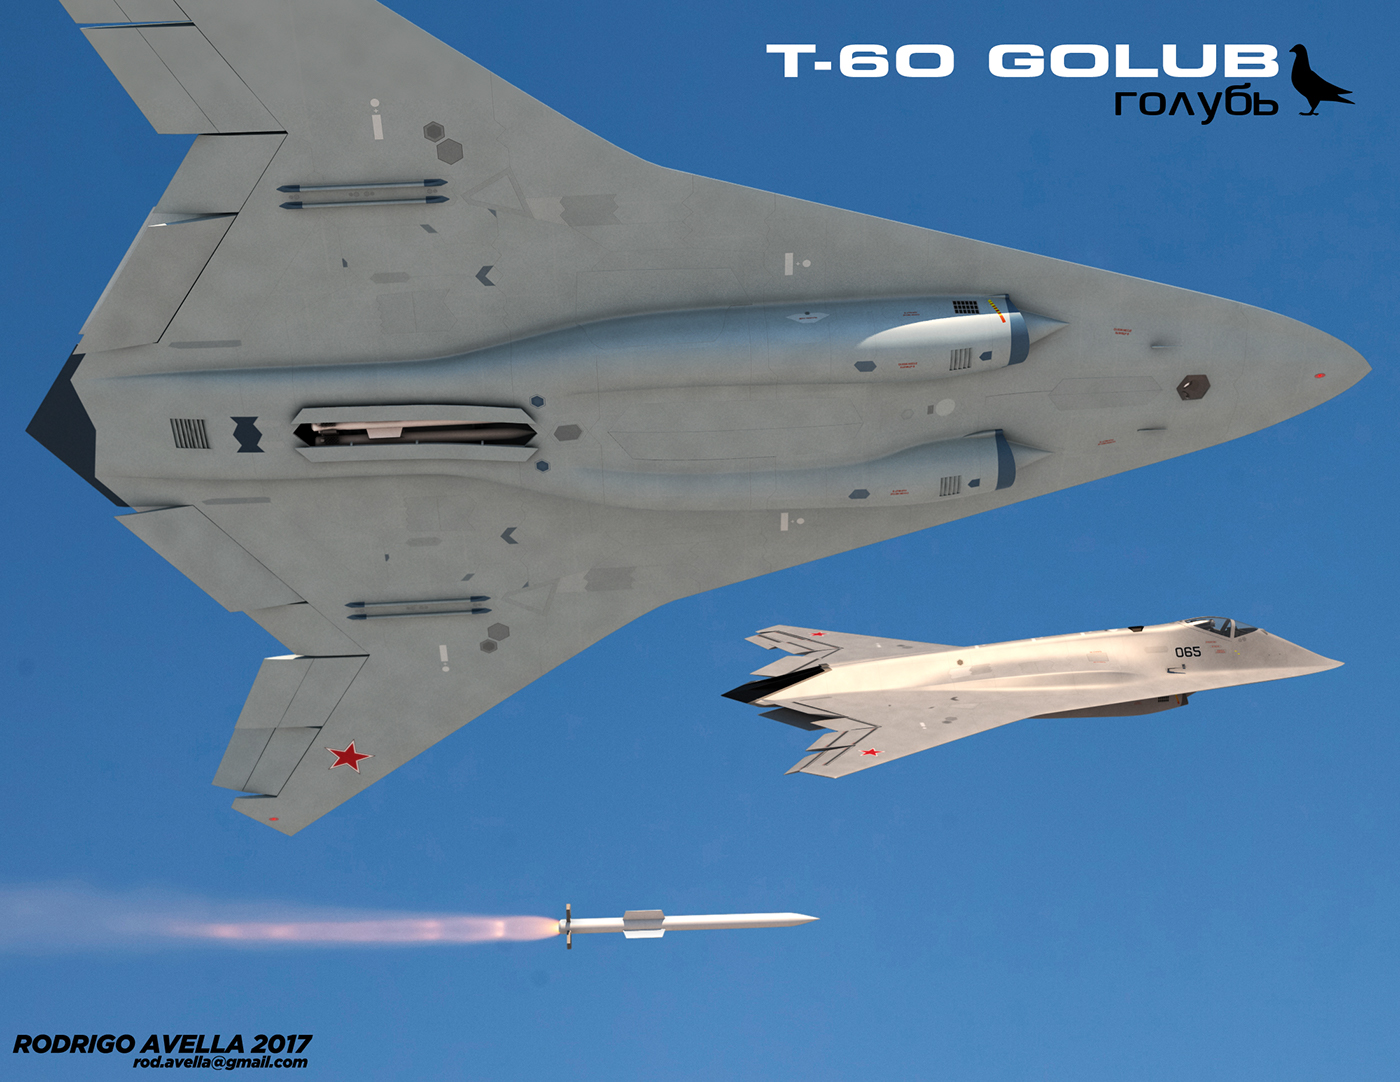 6th aircraft concept fighter future fx generation golub model pigeon russian sixth stealth study sukhoi t60 f/a-xx